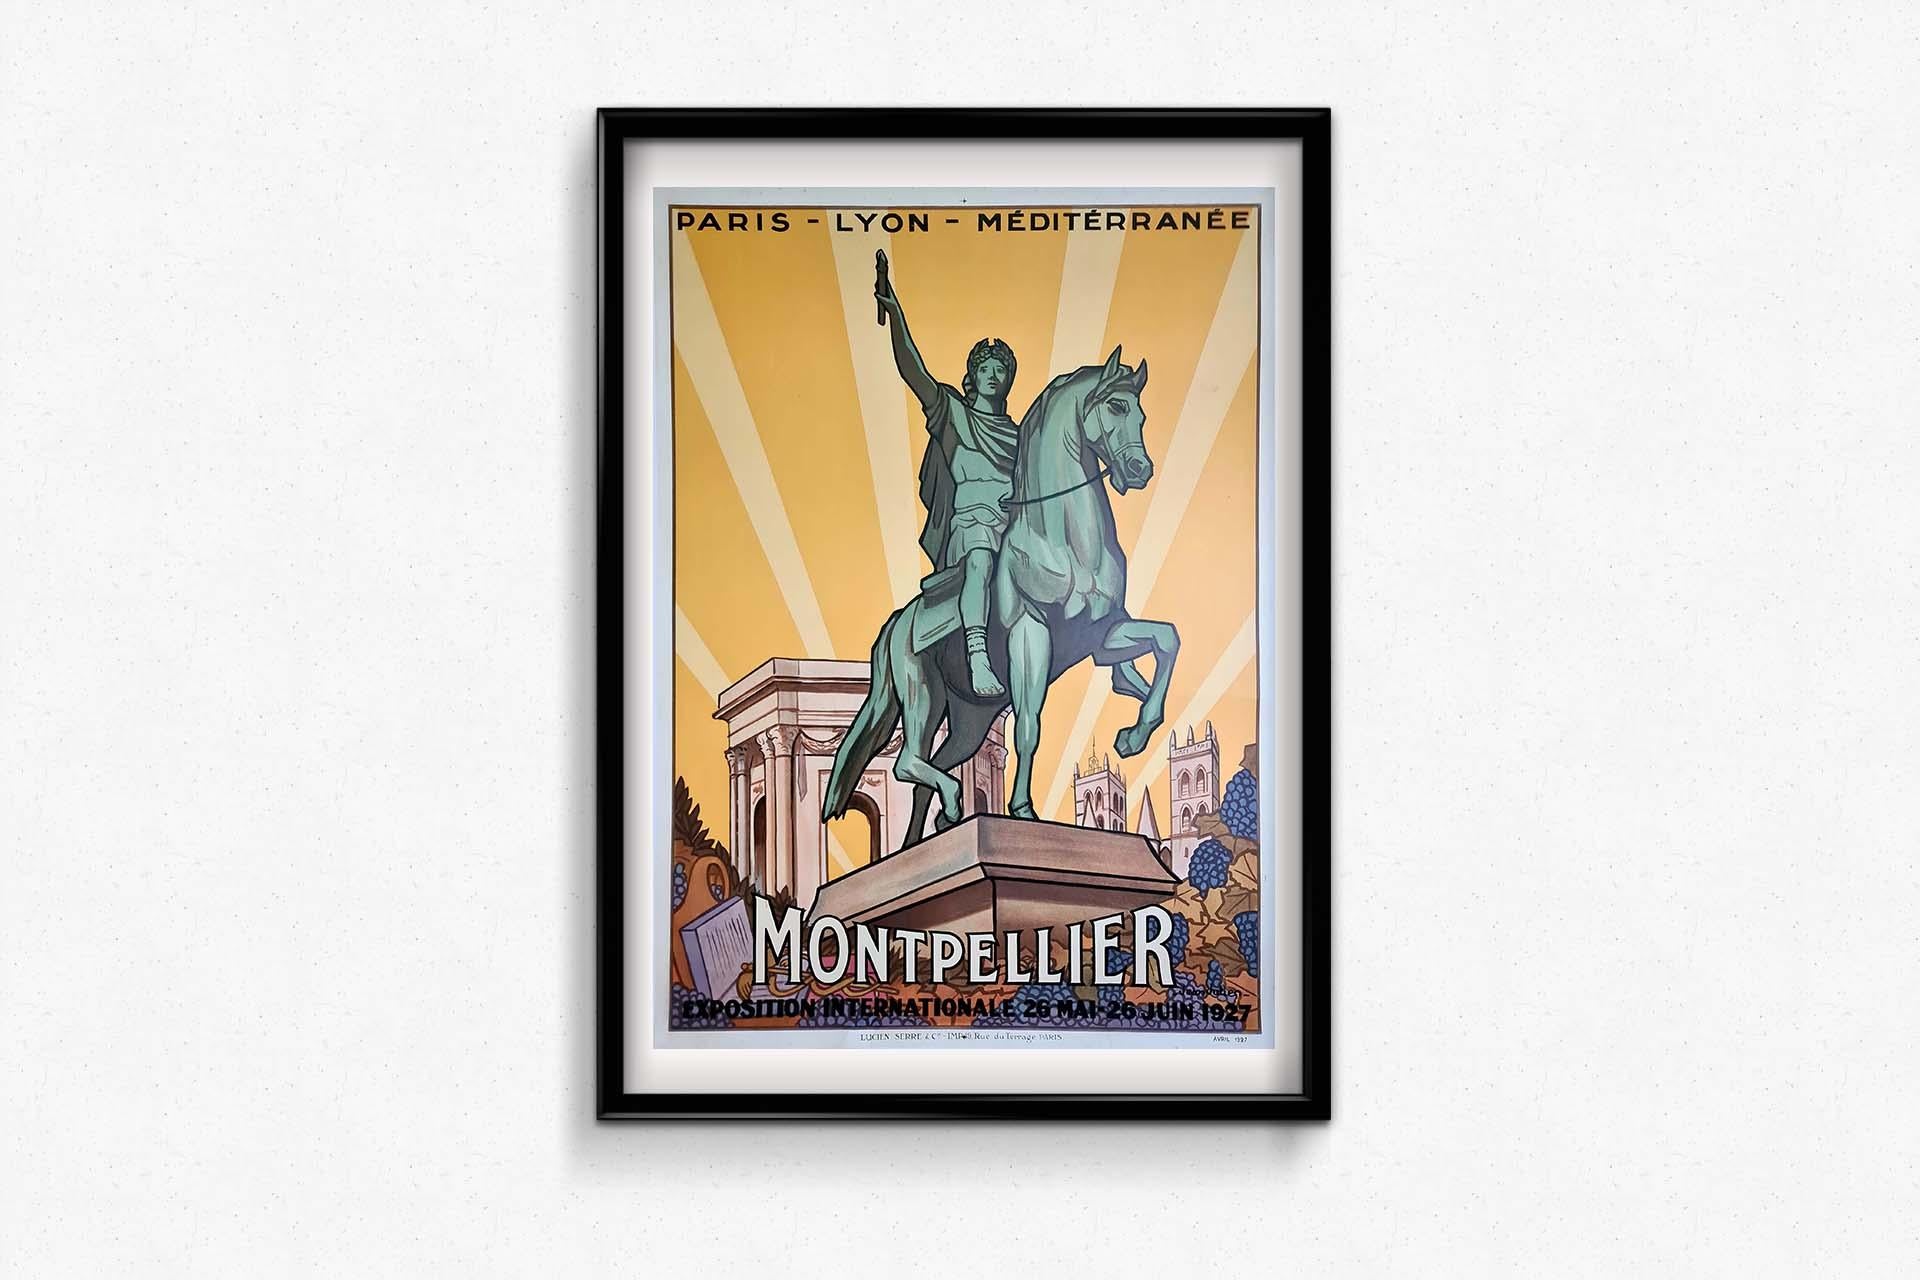 The 1927 original poster by Jean Julien for the Exposition Internationale Montpellier 1927, sponsored by Paris Lyon Méditerranée (PLM), presents a captivating blend of artistry and promotional messaging. Crafted to promote the exposition, the poster